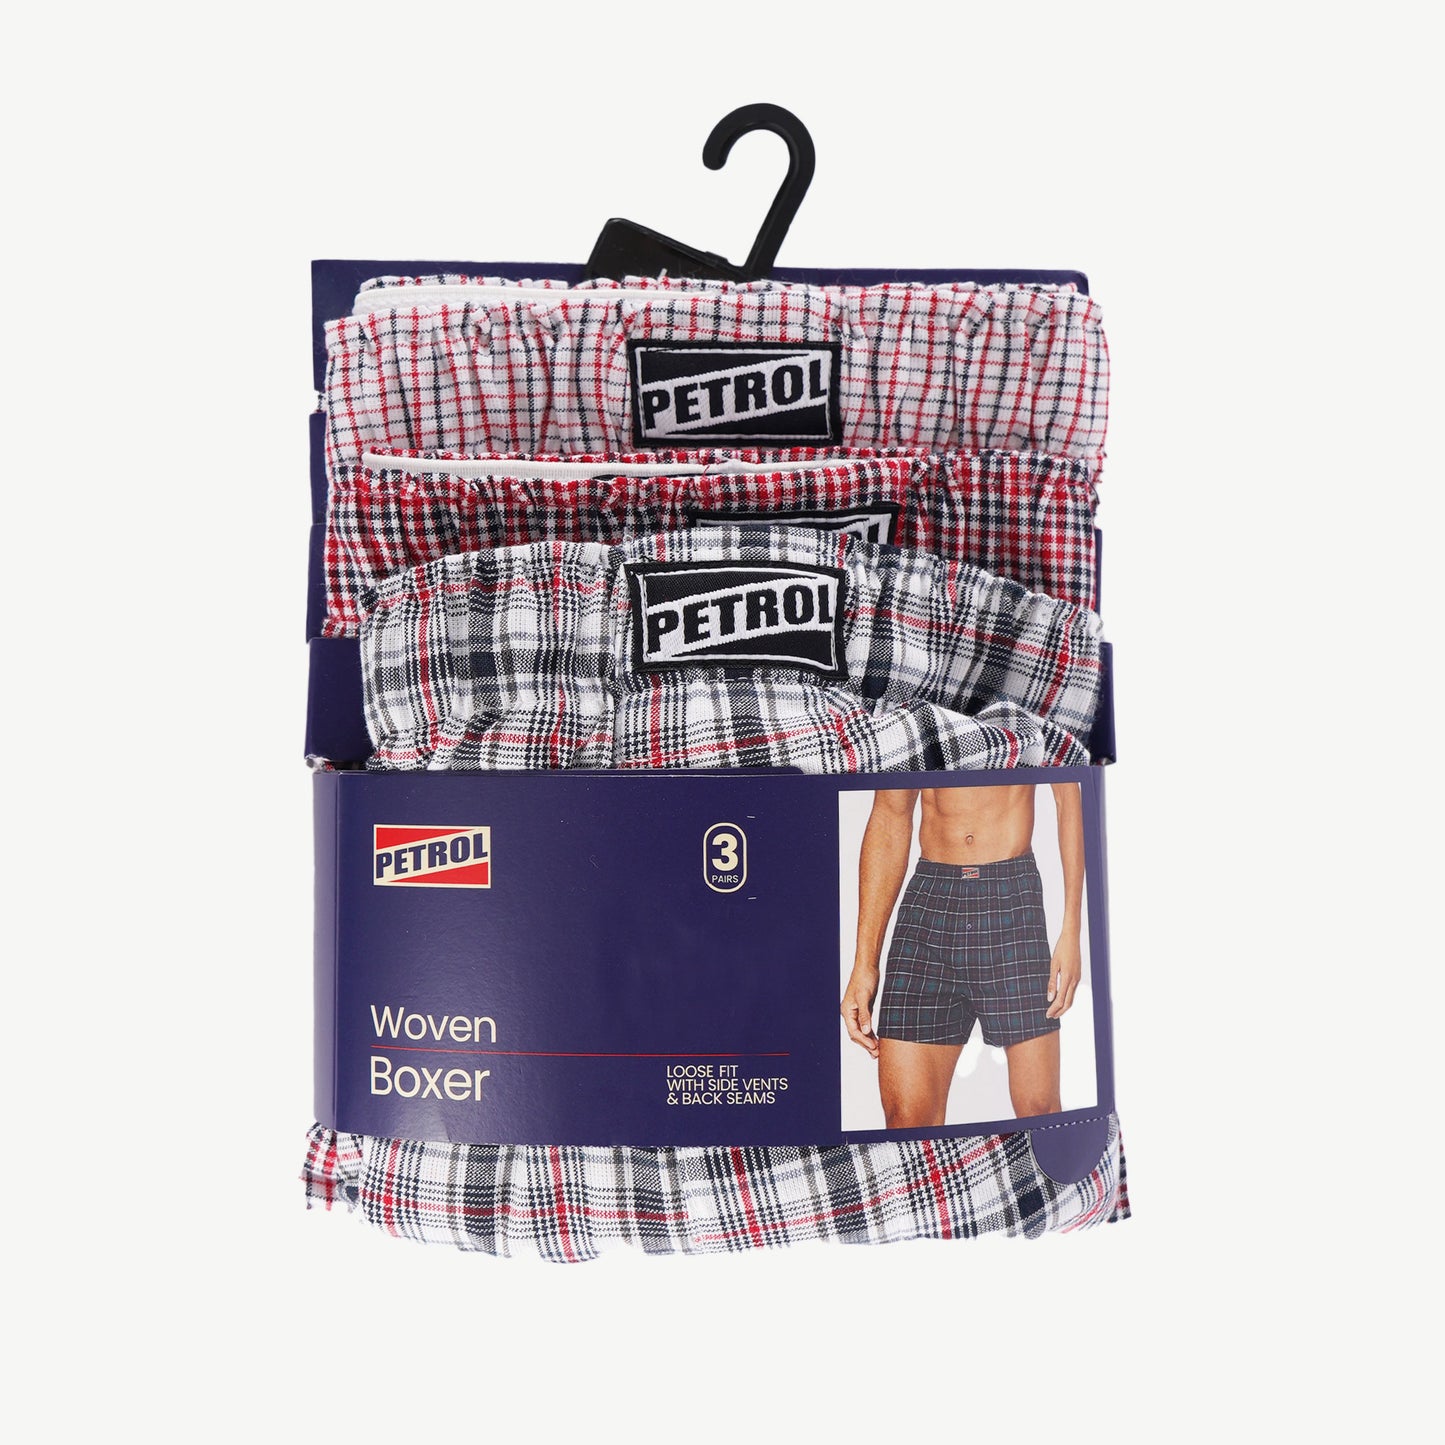 Petrol Men's Basic Accessories 3in1 Innerwear Cotton Fabric 3pcs Set Assorted Boxer short for Men 113912 (Assorted)